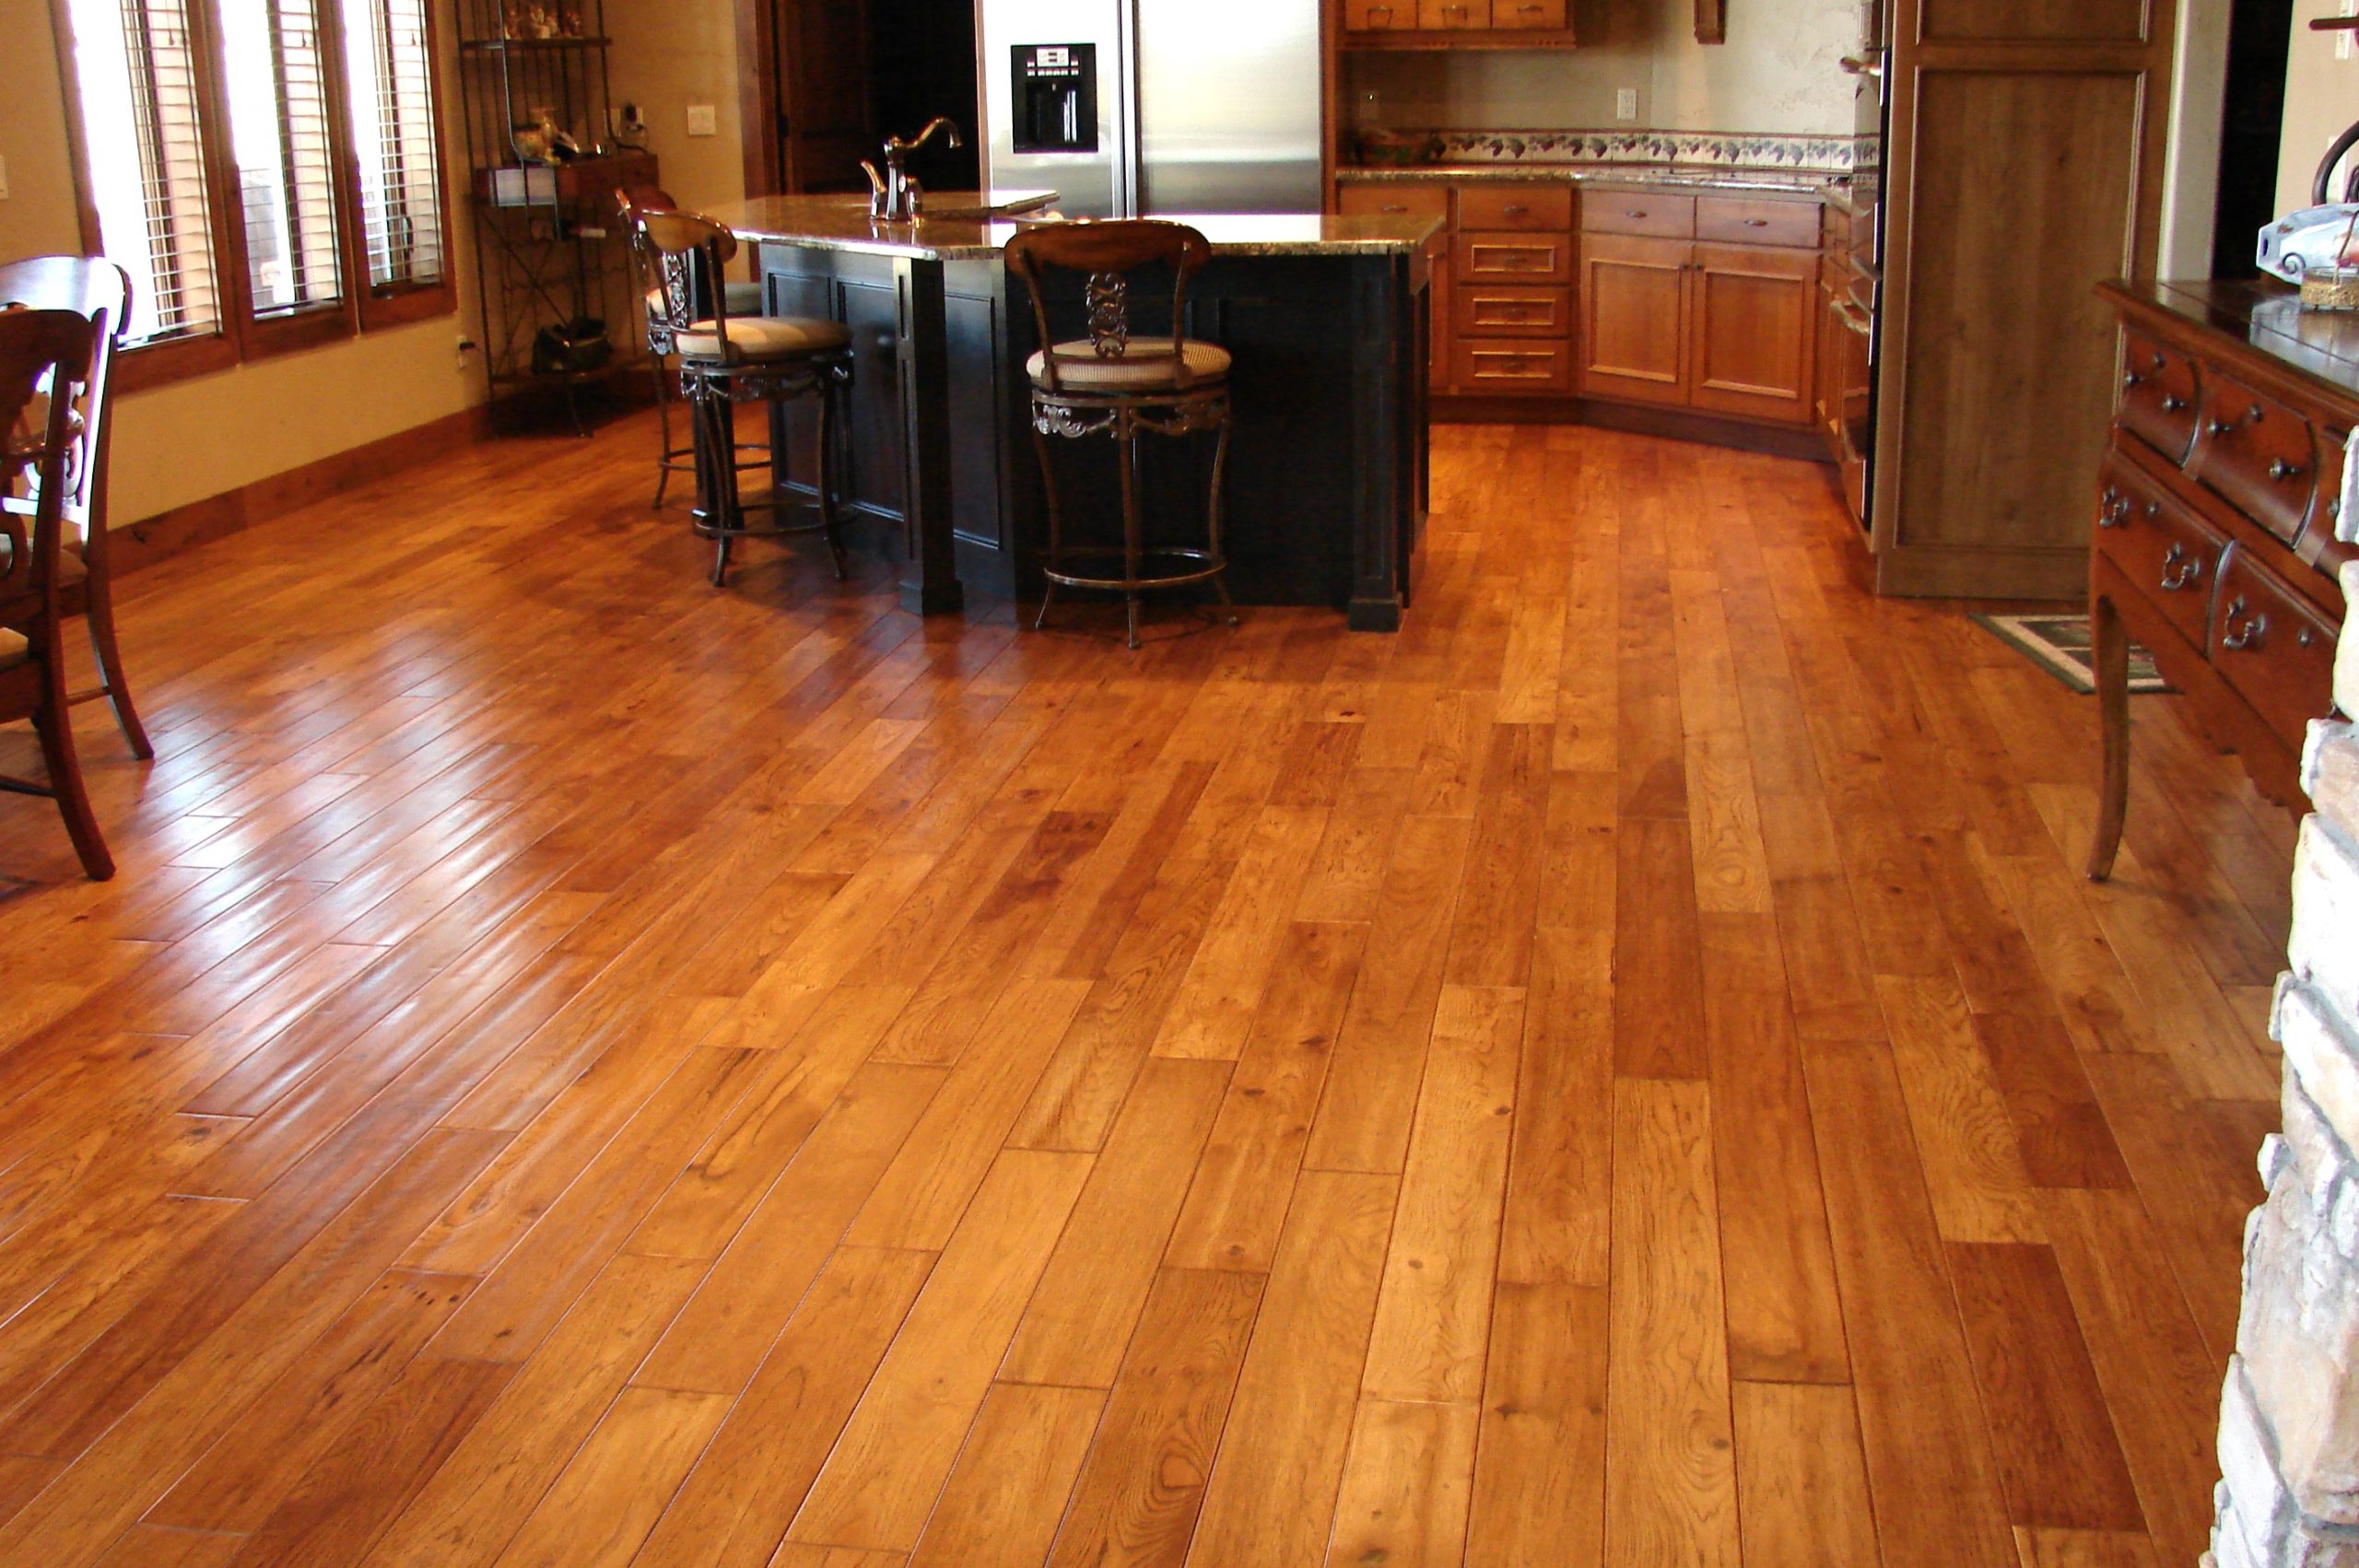 No green remodeling job is complete without some sustainable wood floors.